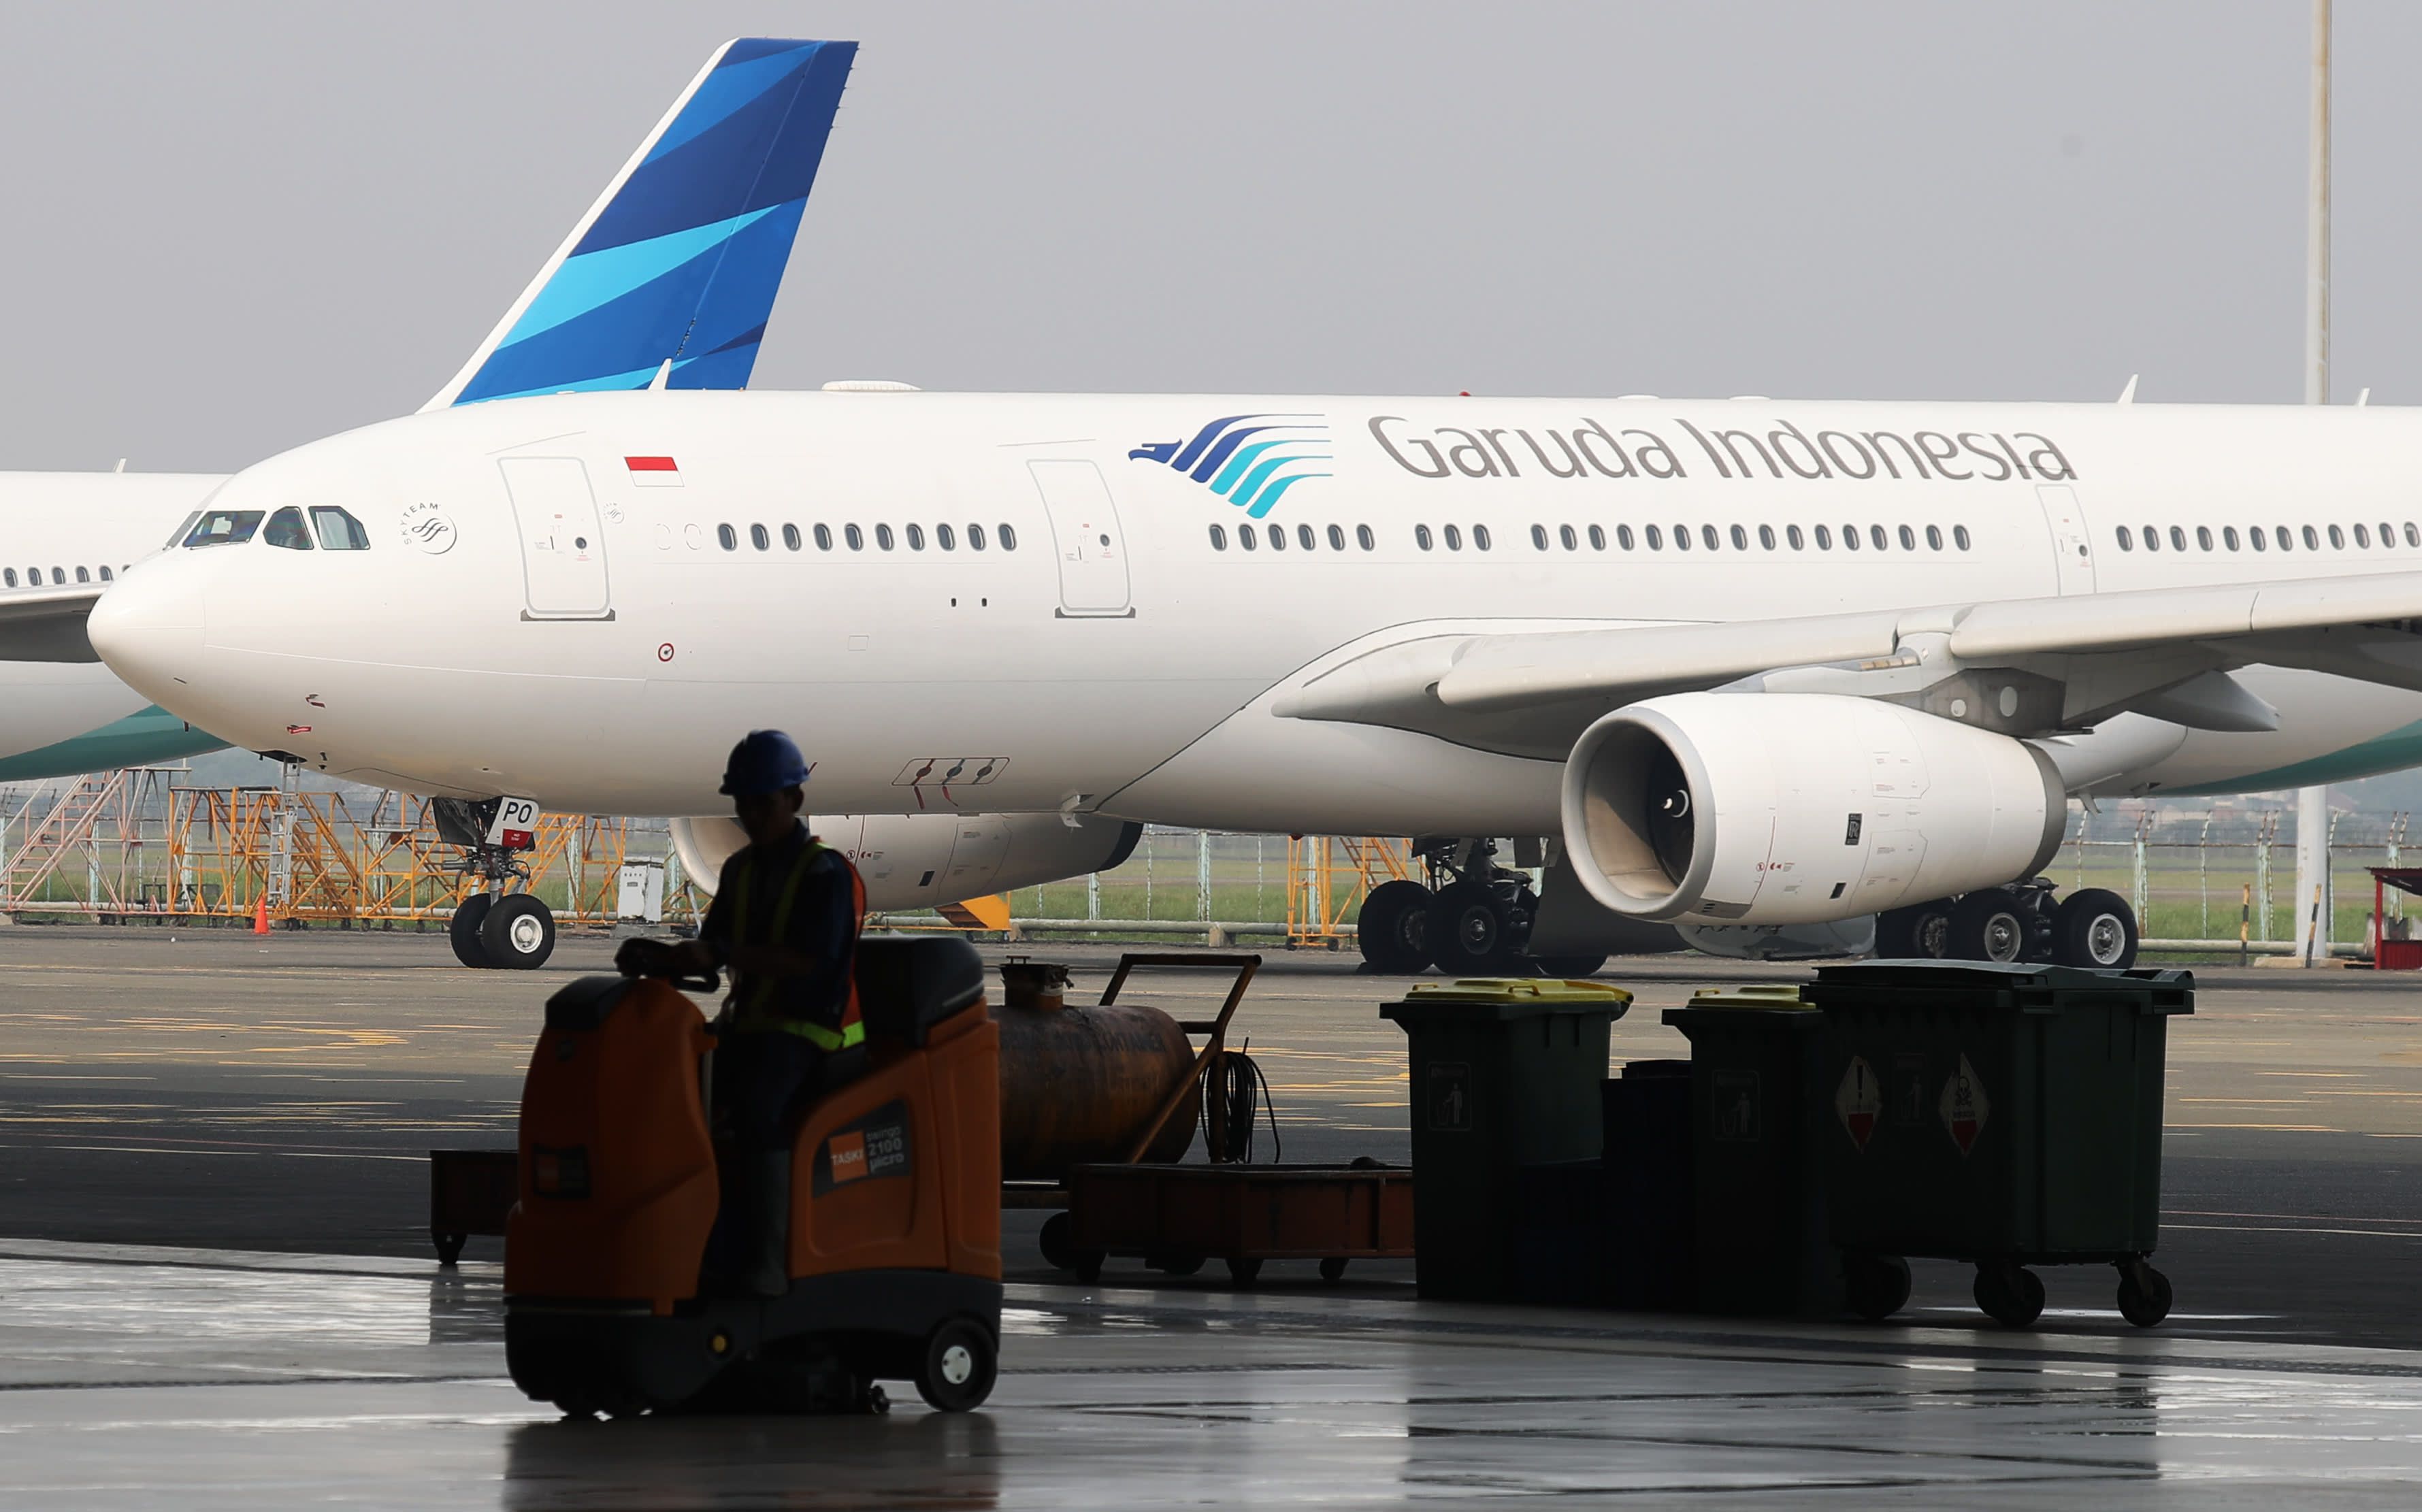 Garuda Indonesia on offensive again after CEO change